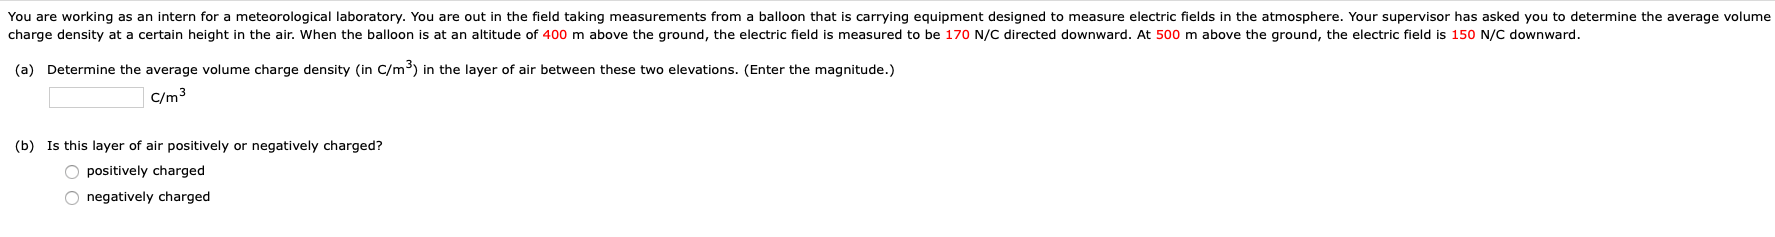 You are working as an intern for a meteorological laboratory. You are out in the field taking measurements from a balloon that is carrying equipment designed to measure electric fields in the atmosphere. Your supervisor has asked you to determine the average volume
charge density at a certain height in the air. When the balloon is at an altitude of 400 m above the ground, the electric field is measured to be 170 N/C directed downward. At 500 m above the ground, the electric field is 150 N/C downward.
(a) Determine the average volume charge density (in C/m³) in the layer of air between these two elevations. (Enter the magnitude.)
C/m3
(b) Is this layer of air positively or negatively charged?
O positively charged
O negatively charged
